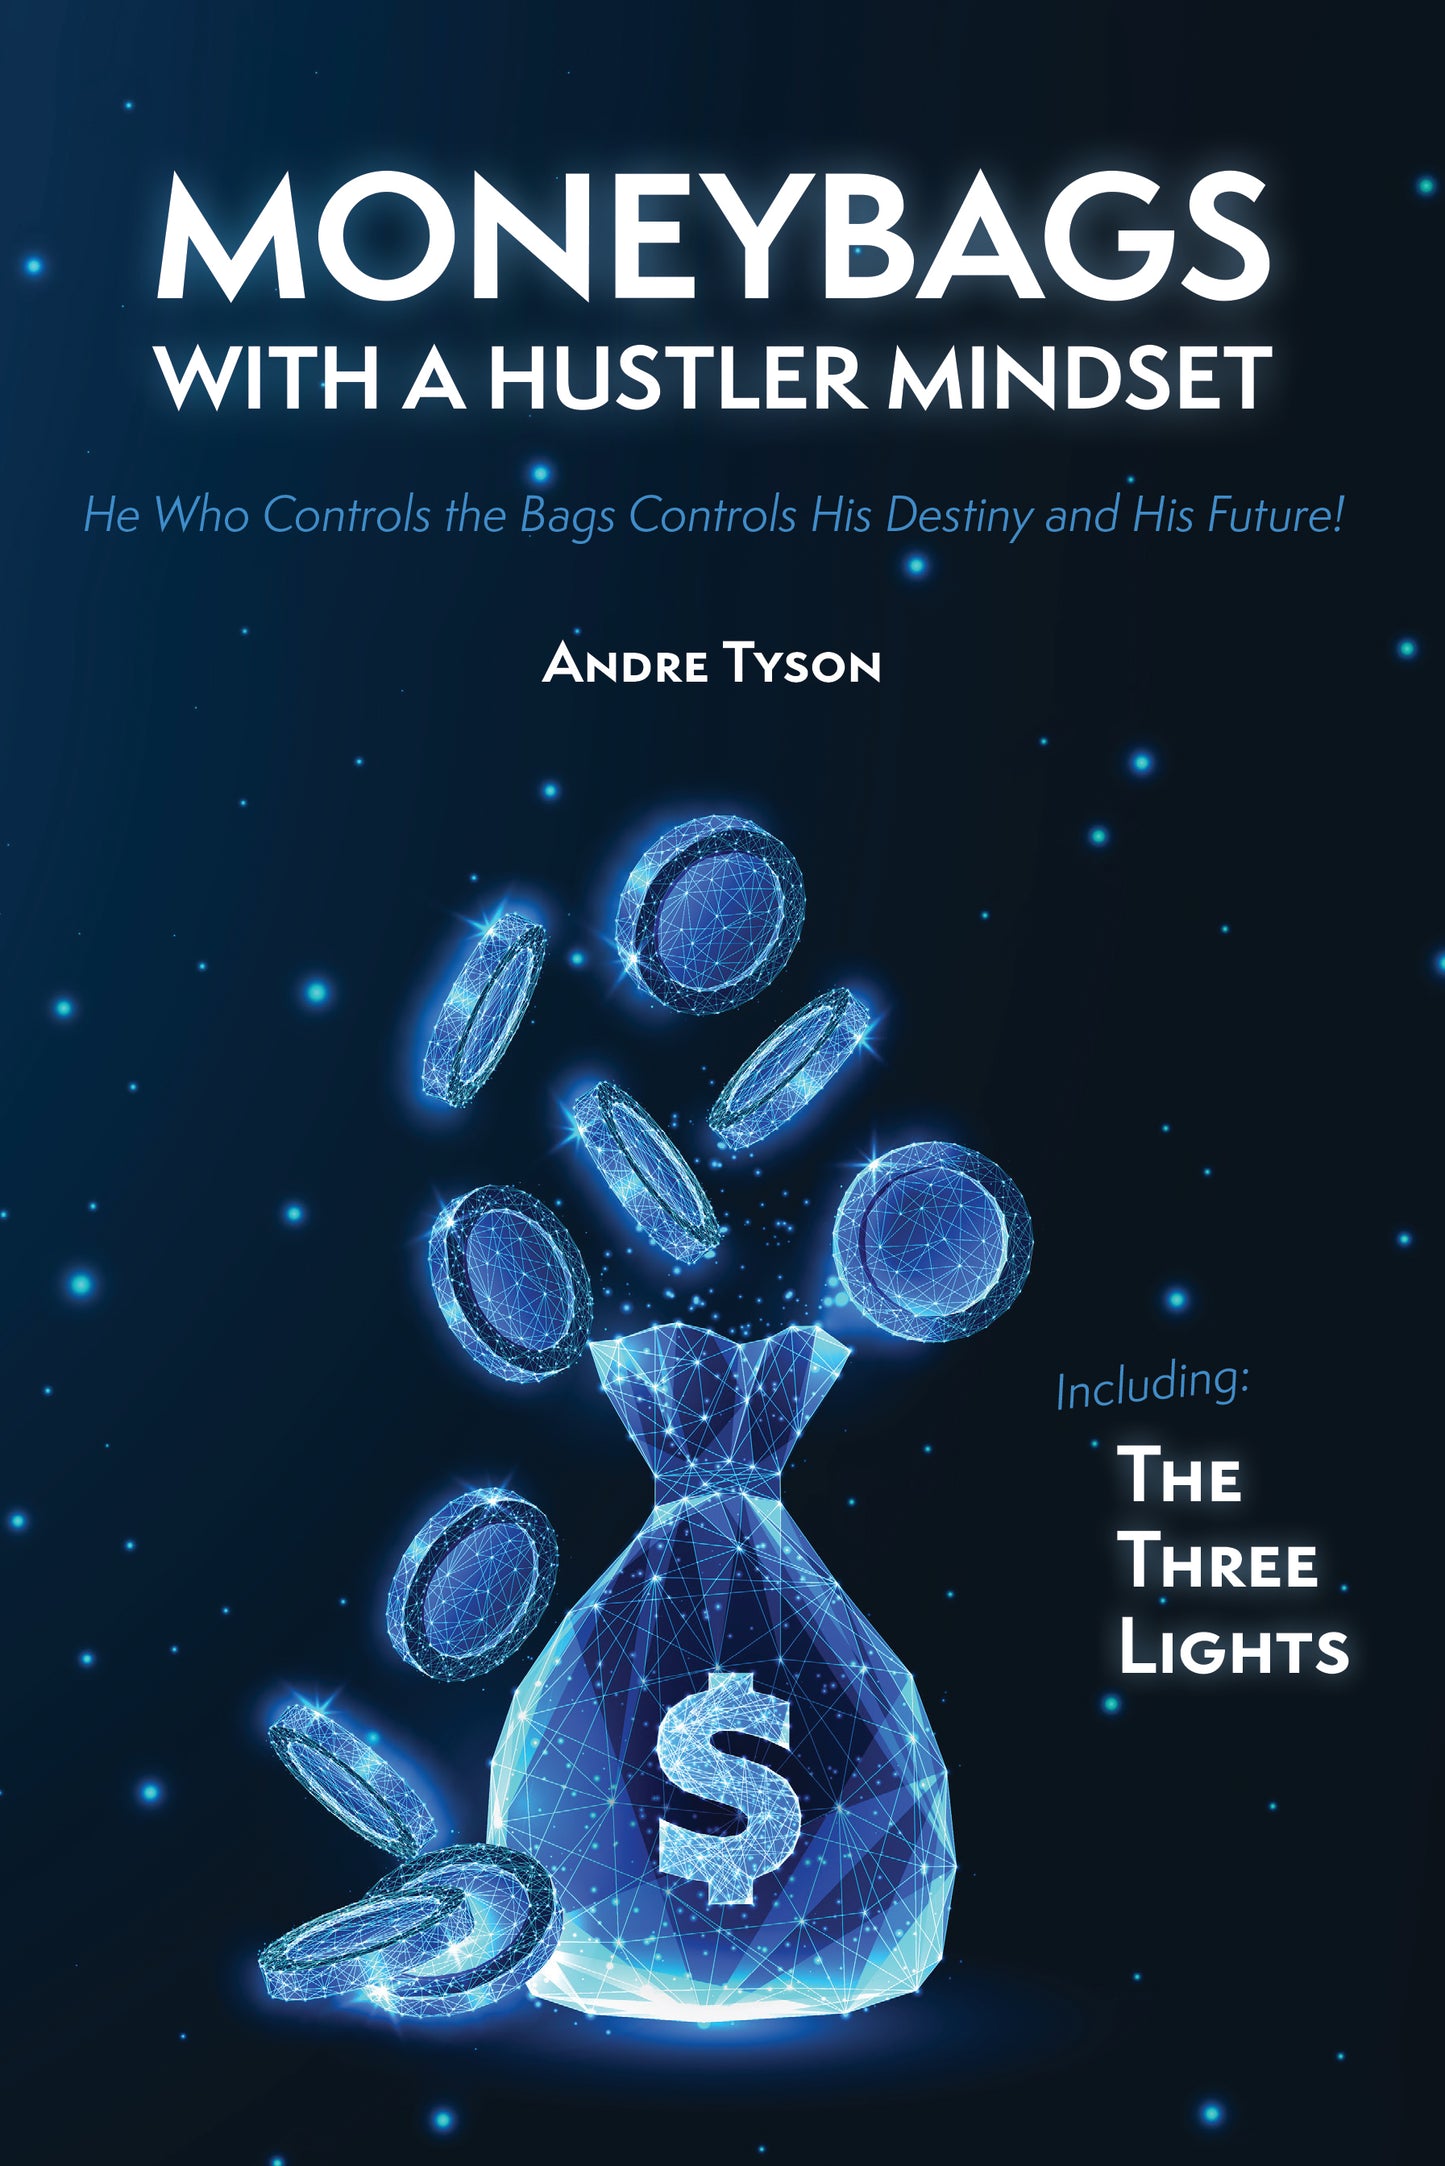 Moneybags with a Hustler Mindset + The Three Lights